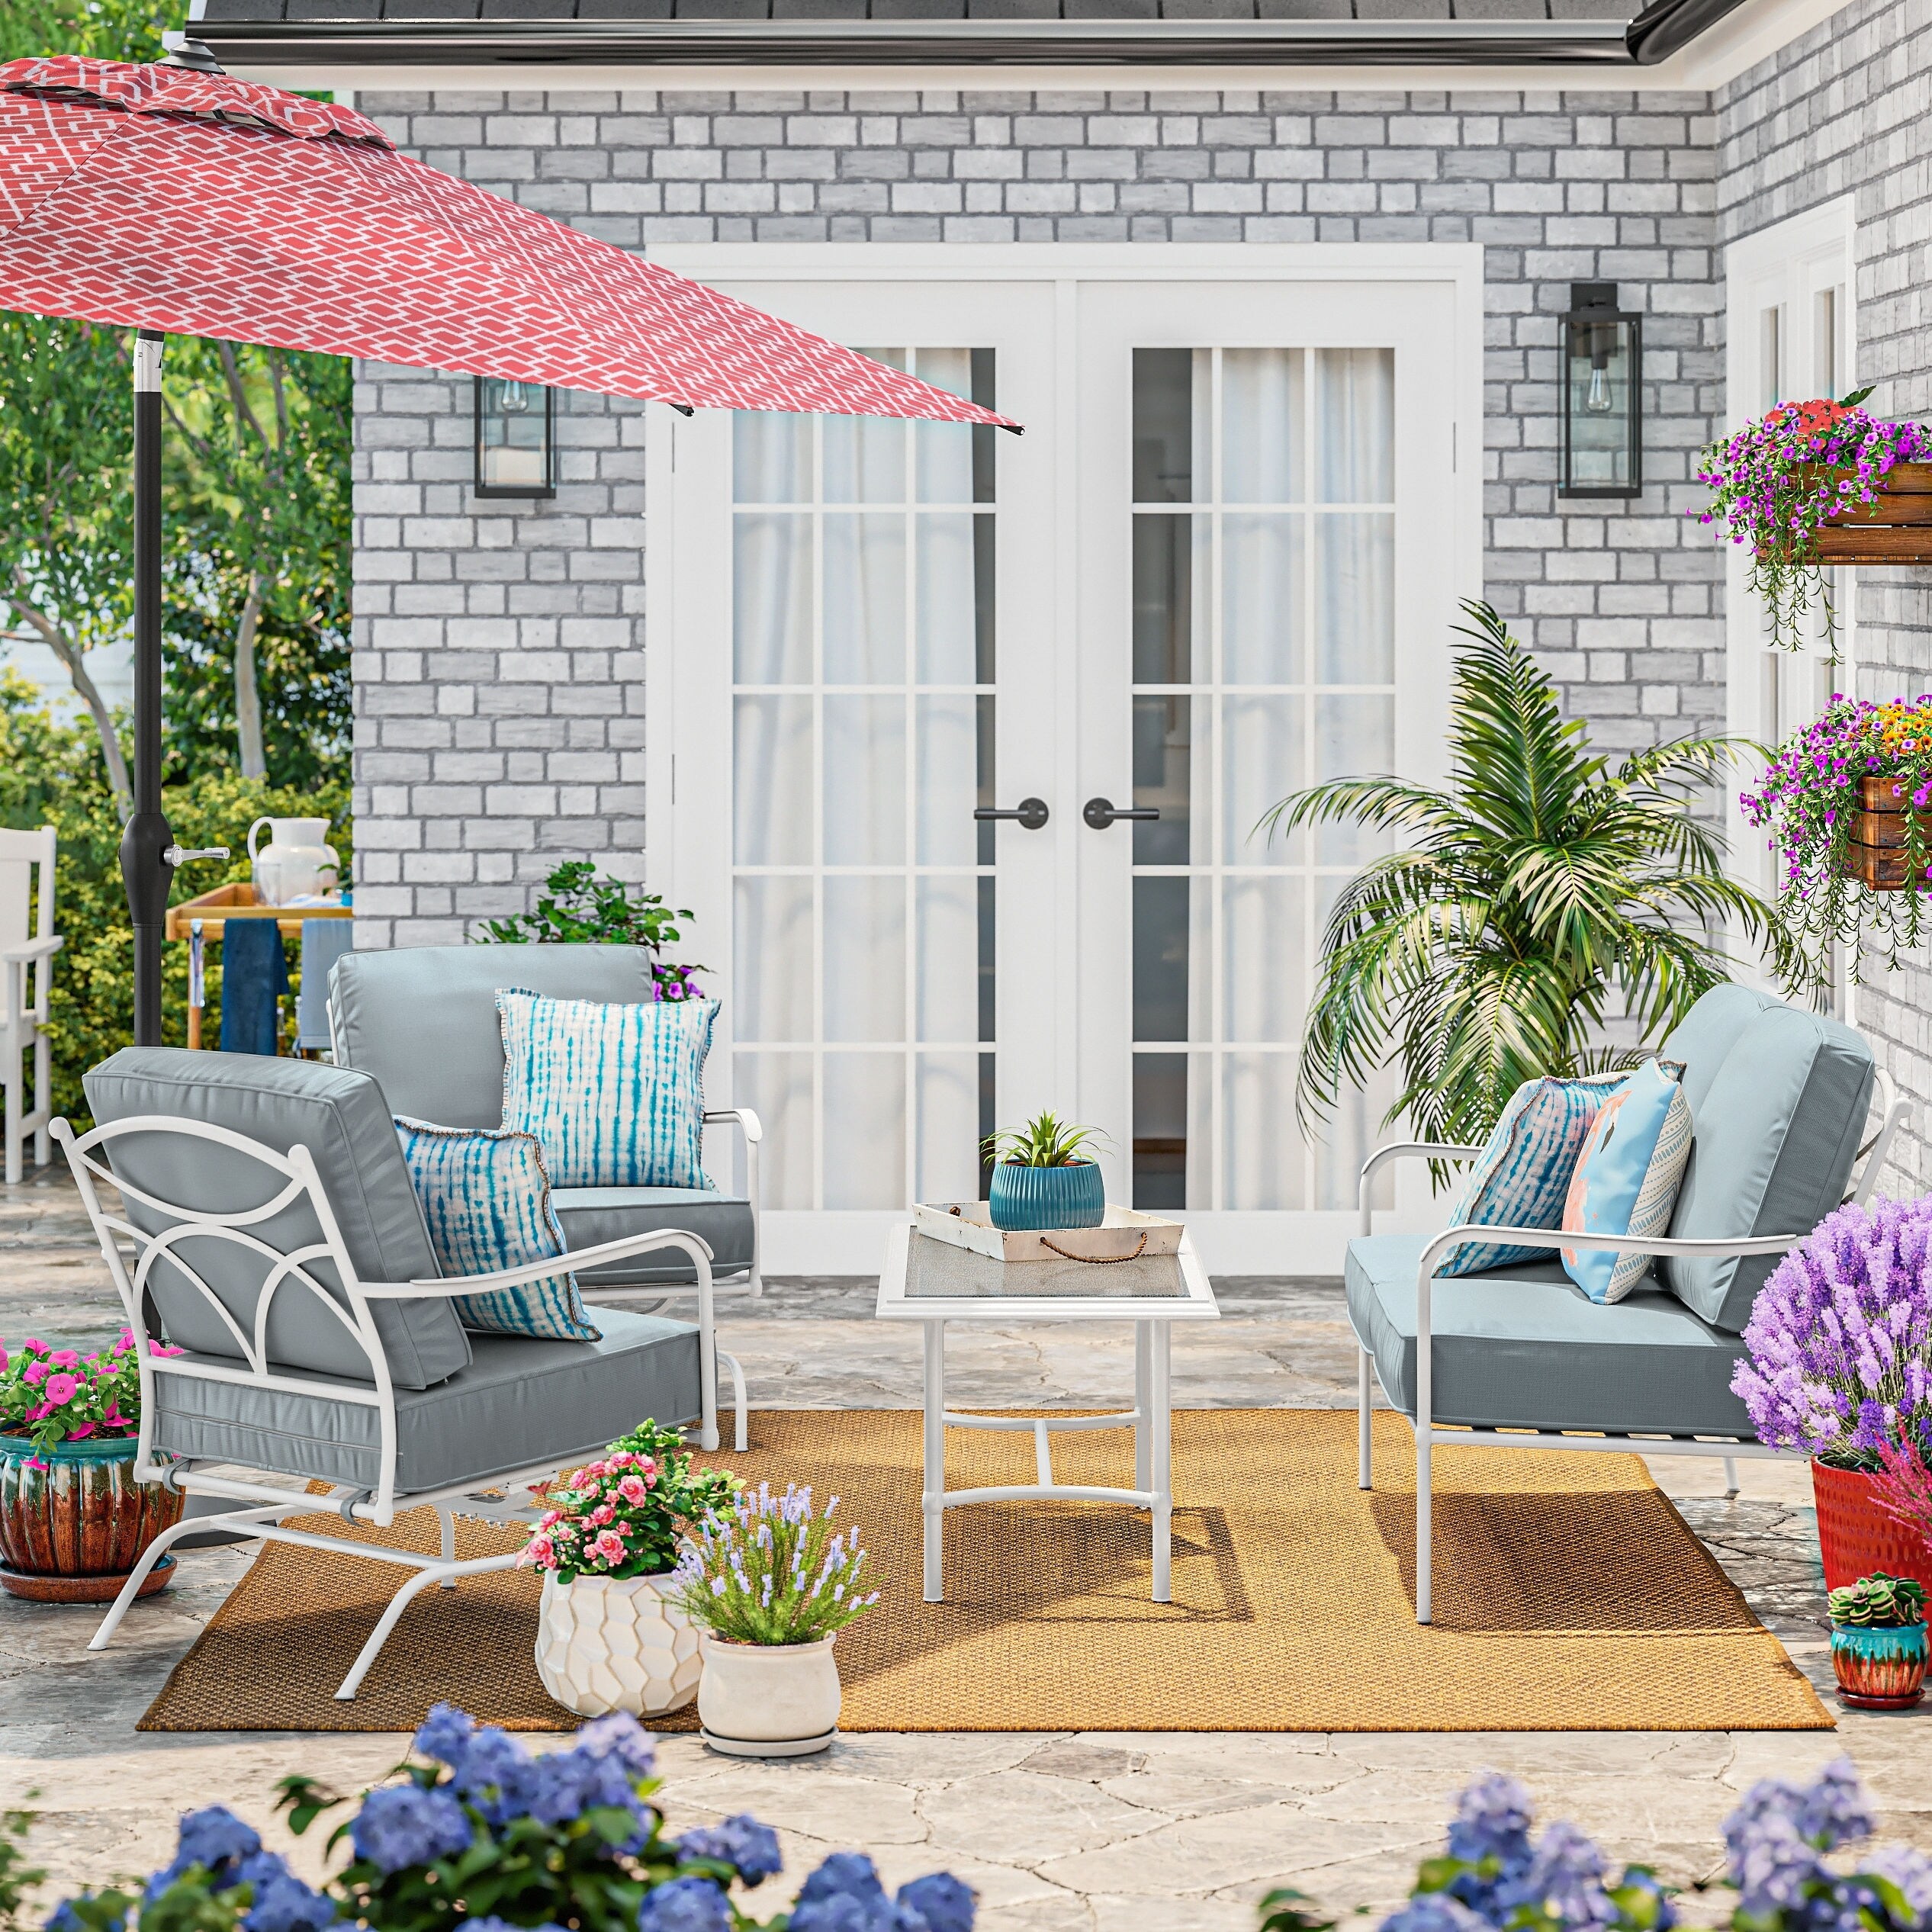 department 2-Piece with at Seacrest Blue Cushions the Style Set in Sets Conversation Conversation Patio Selections Patio